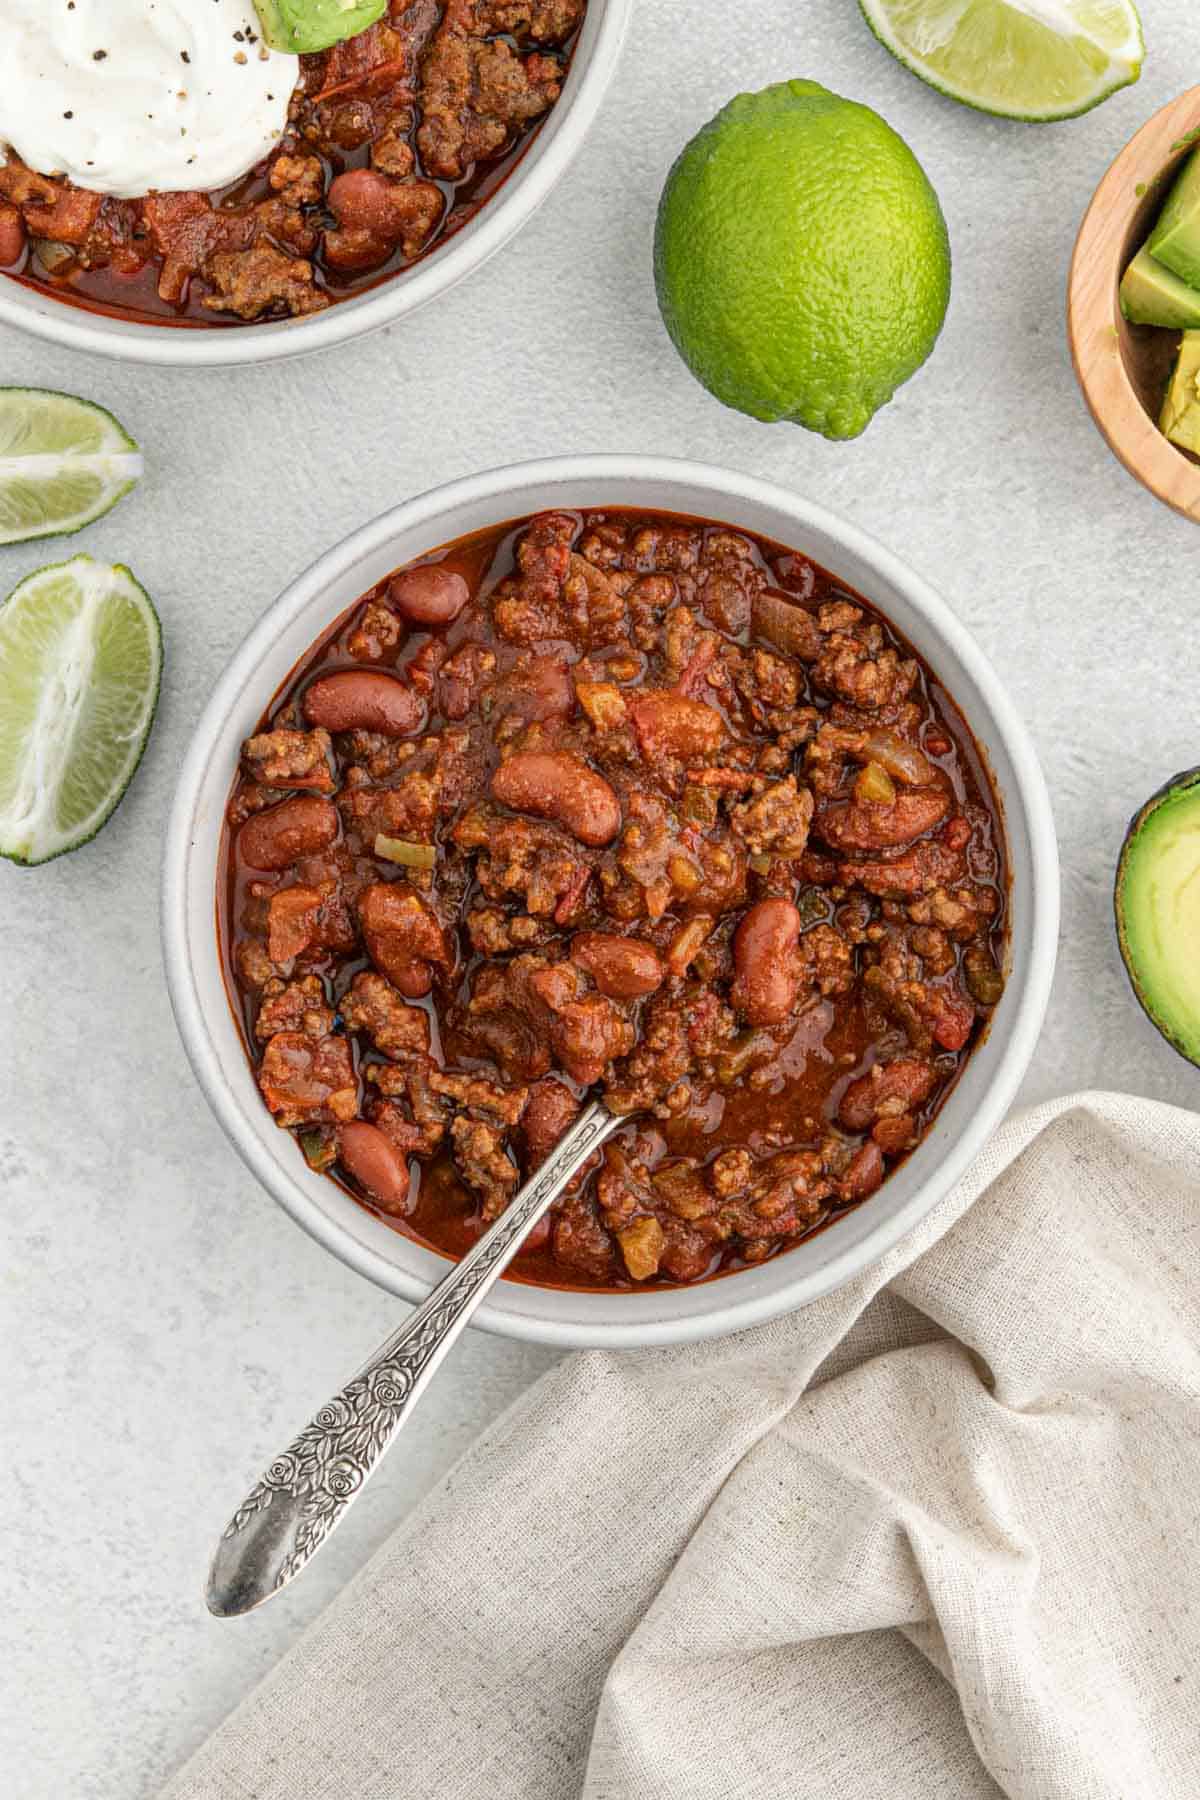 A bowl of best chili on the table without any toppings while limes and avocado are scattered around on the table top.